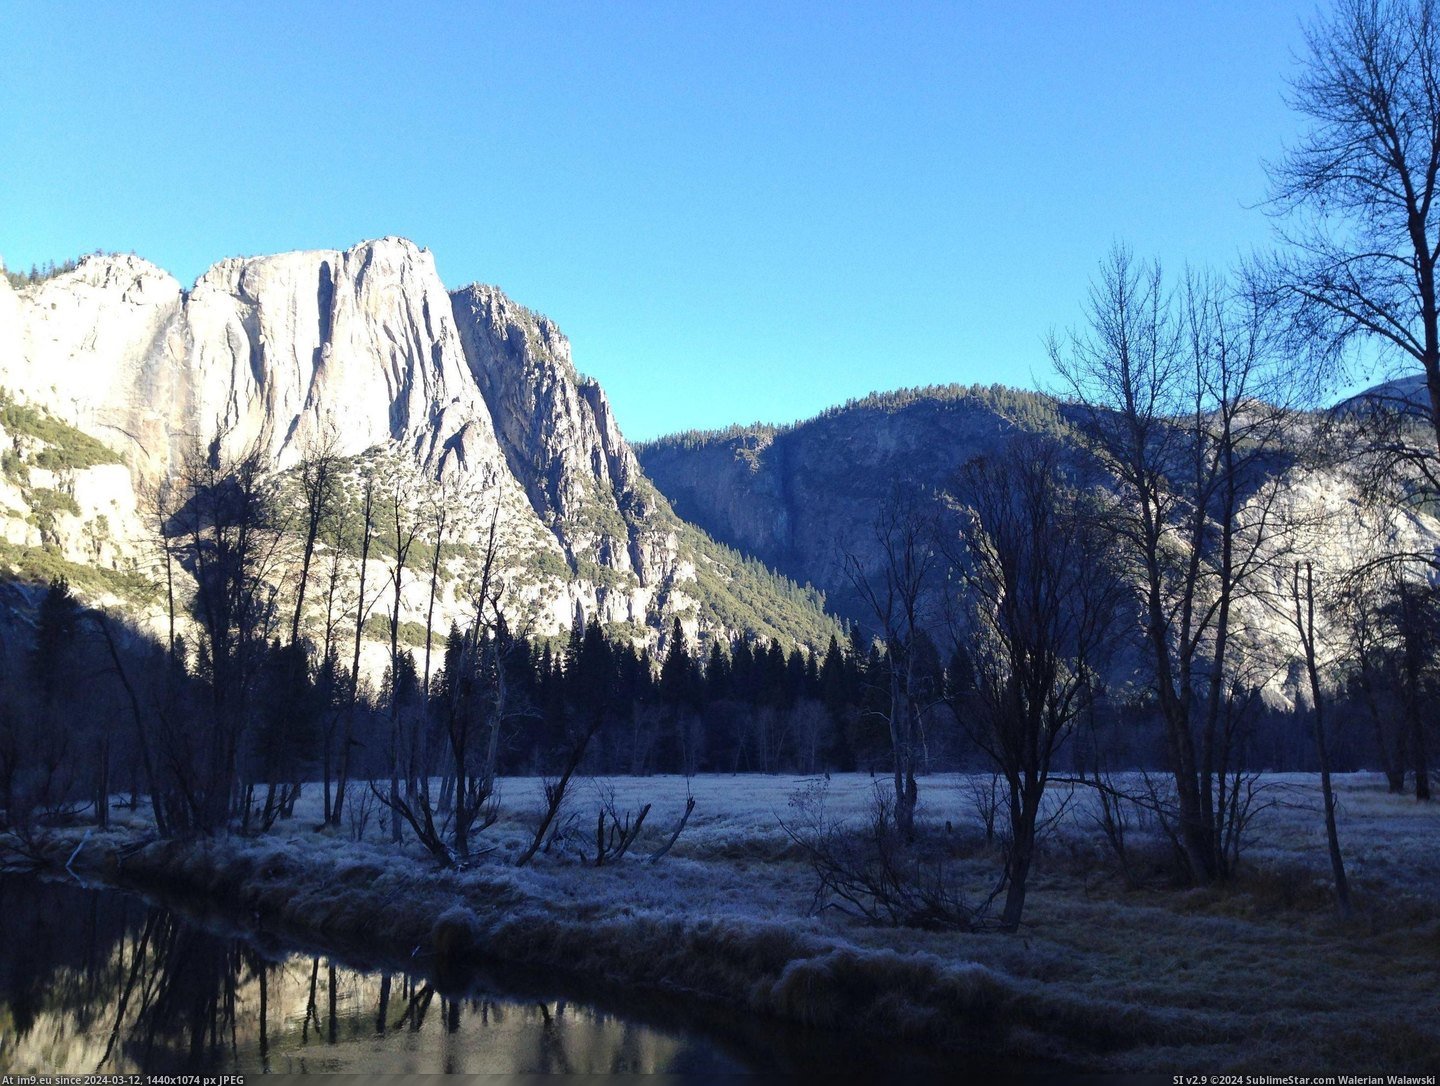 #Picture #Yosemite #Frosty #Morning [Earthporn] Picture I took on a frosty morning in Yosemite [2938 x 2203] Pic. (Изображение из альбом My r/EARTHPORN favs))